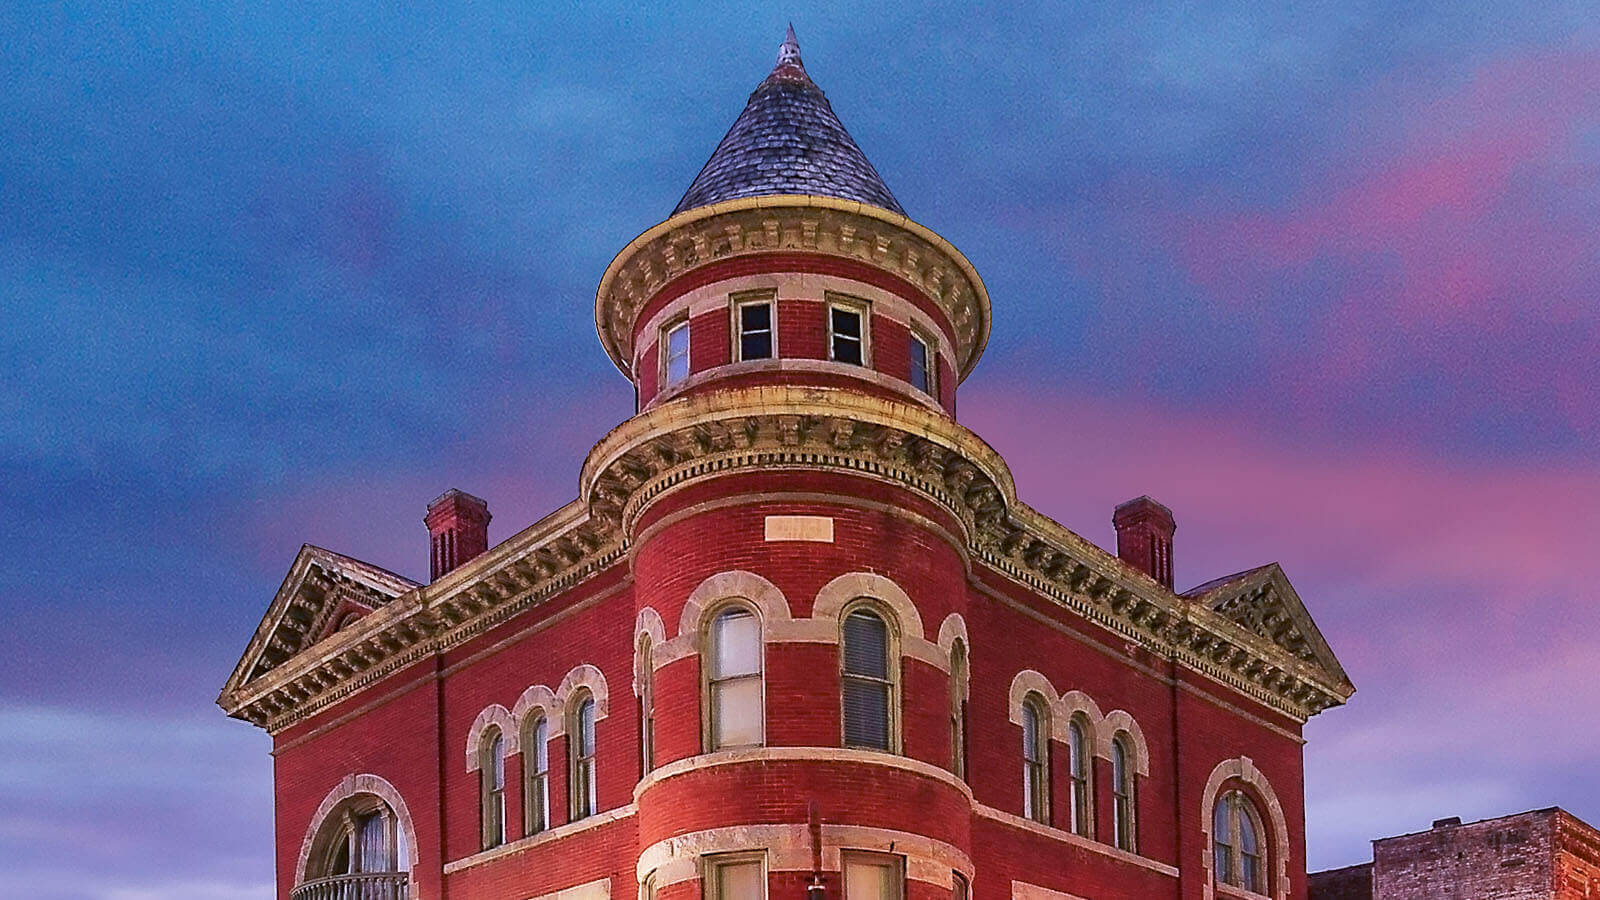 The red brick Marquis building in Staunton Virginia stands tall in the foreground of a blue and purple sky at dusk. 